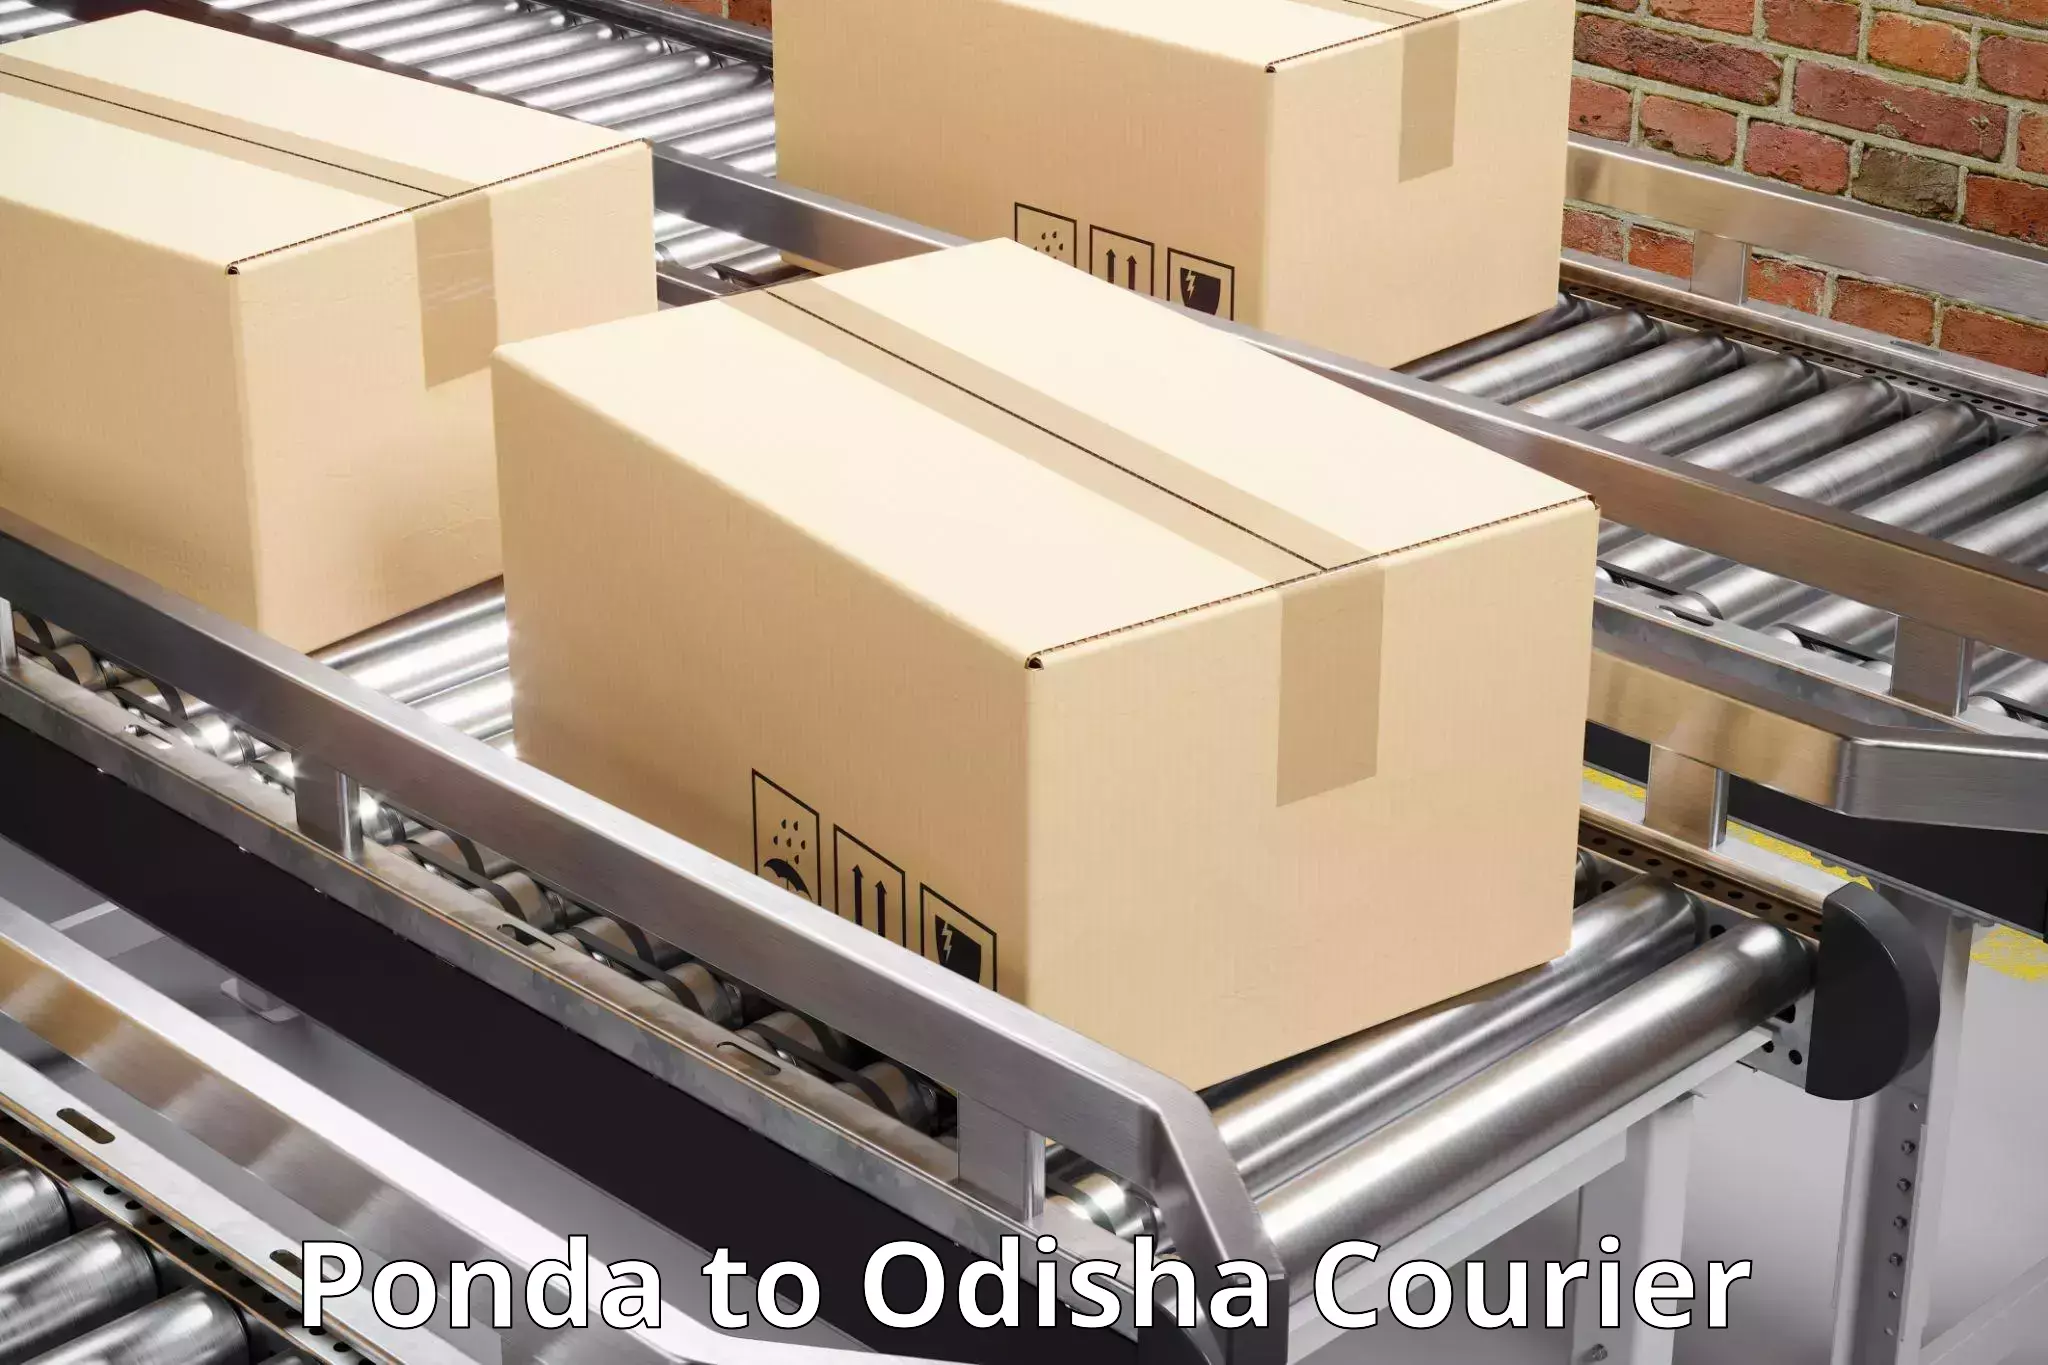 State-of-the-art courier technology Ponda to Phulbani